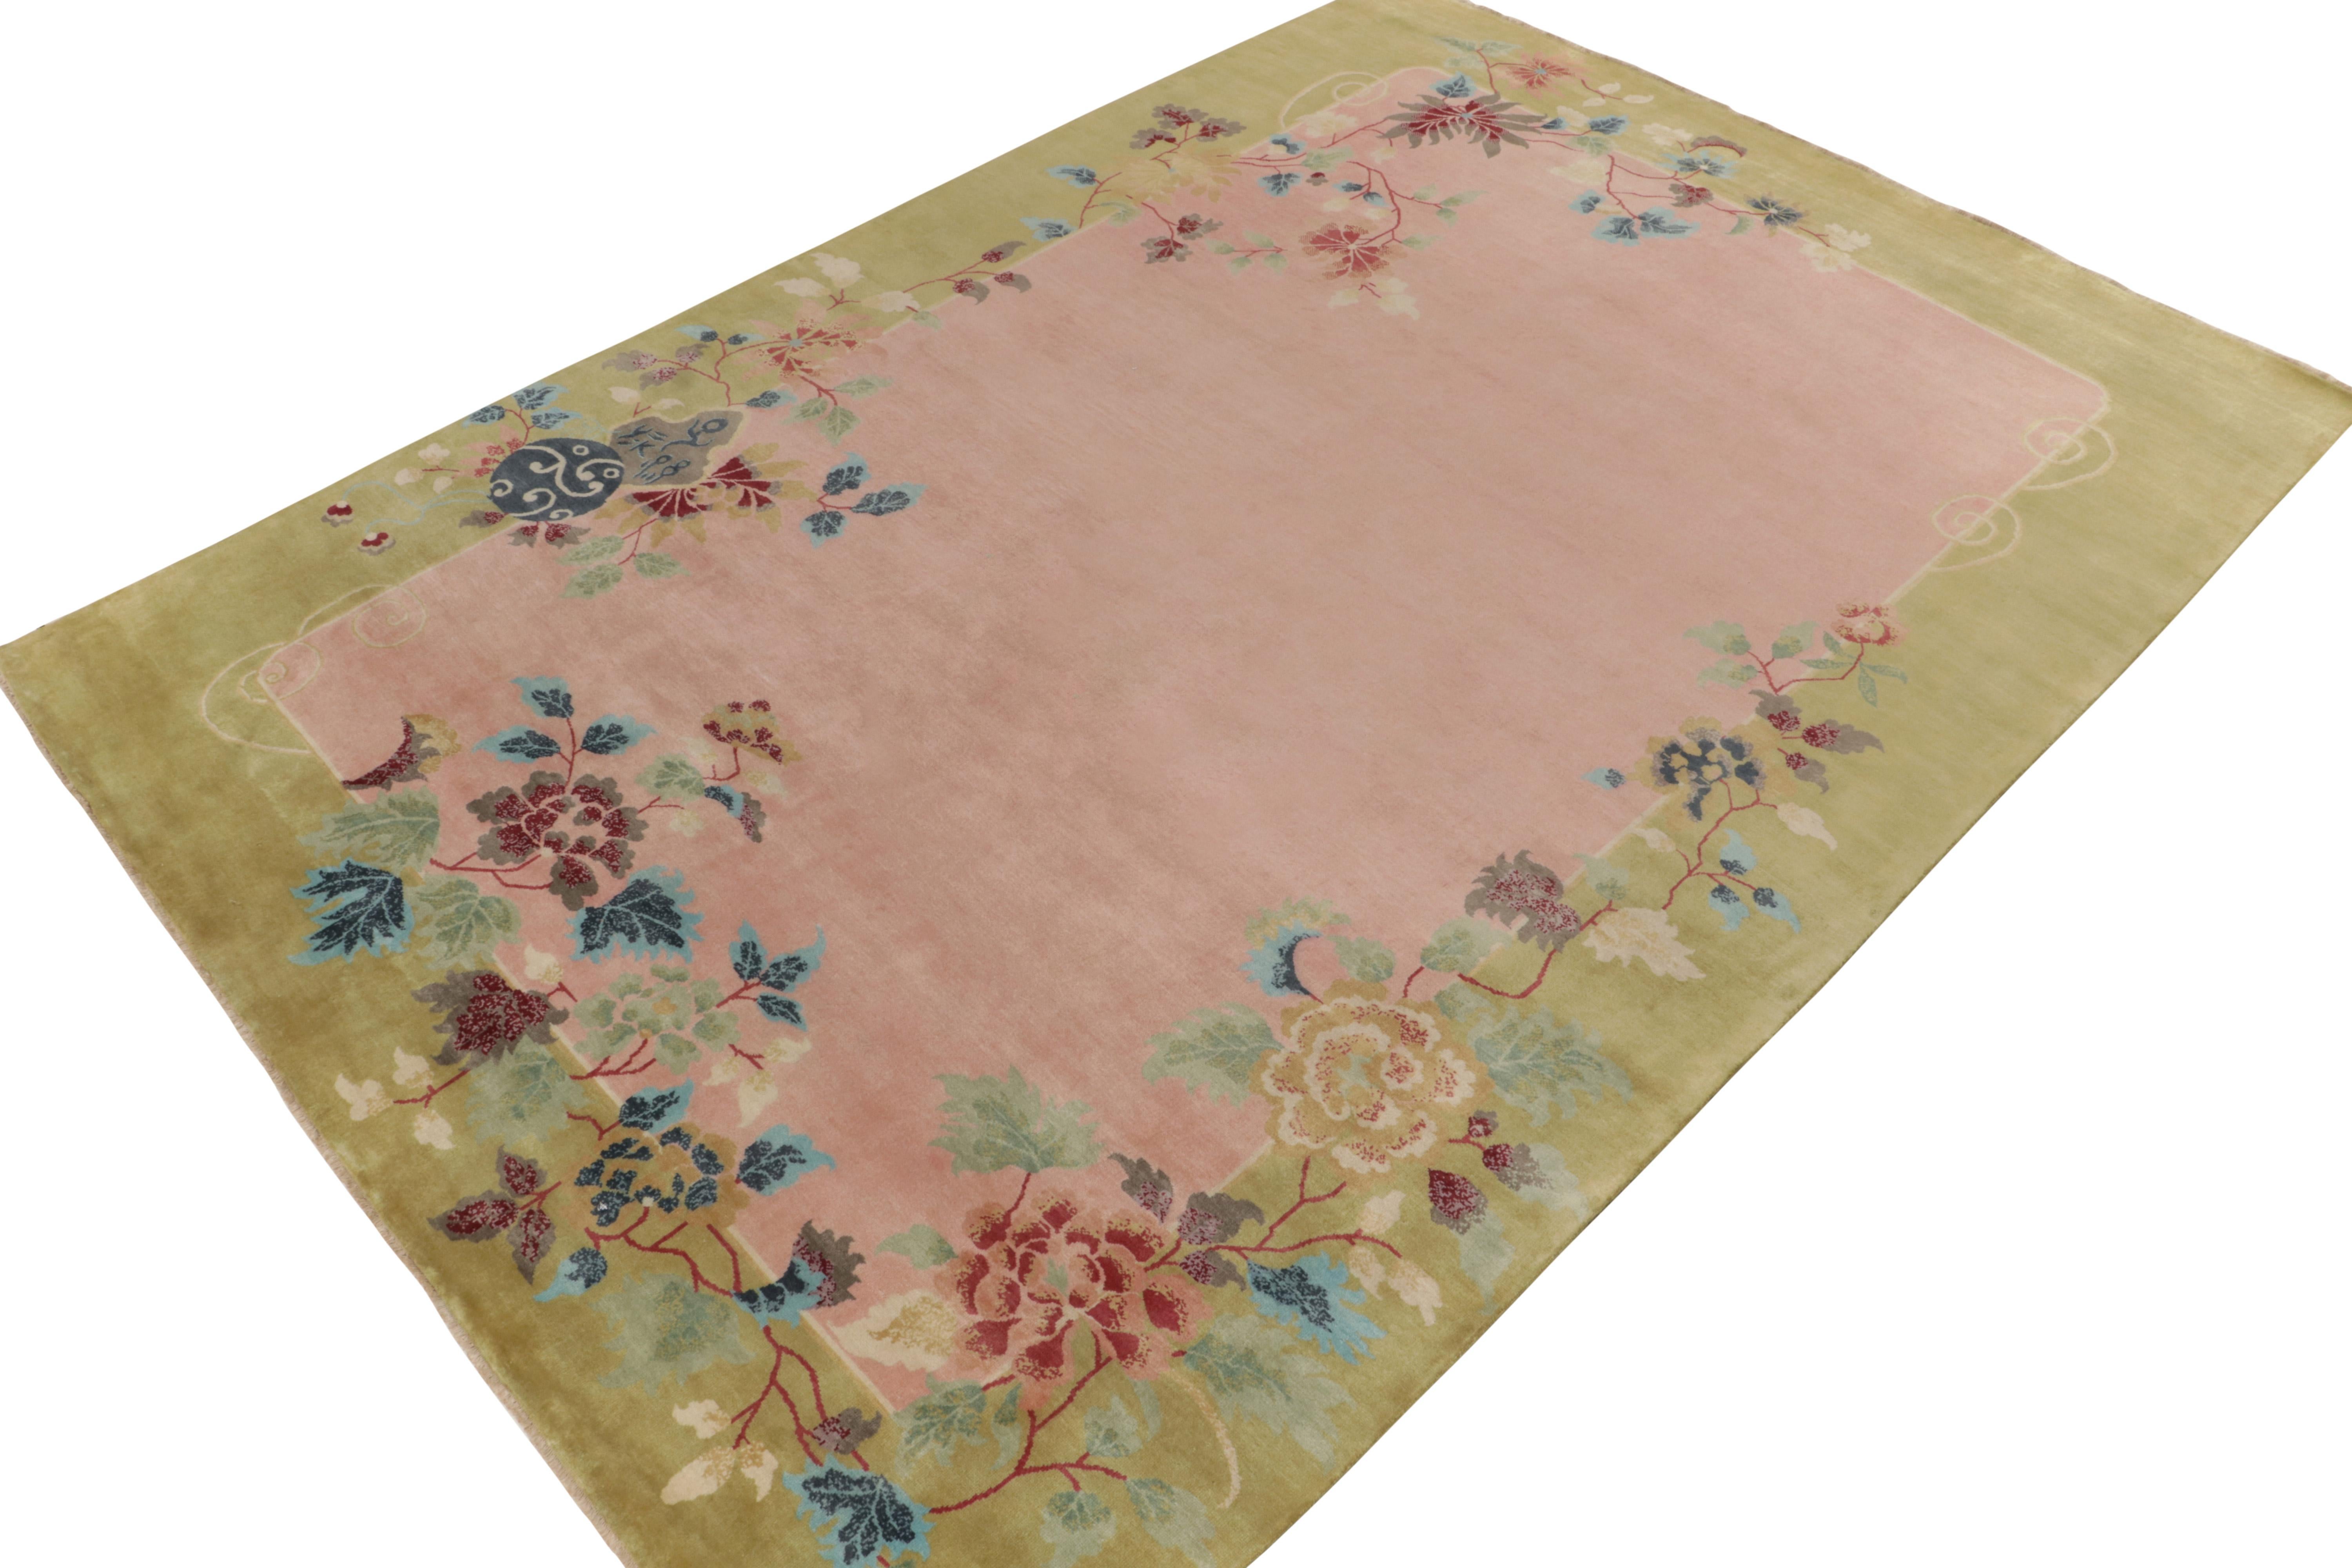 Hand-knotted in wool, a 10x14 ode to Chinese Art Deco rugs from the inspired new Deco Collection by Rug & Kilim. 

On the Design: The bejeweled piece enjoys a whimsical pink open field beautifully encased in a greenish-gold border, with floral